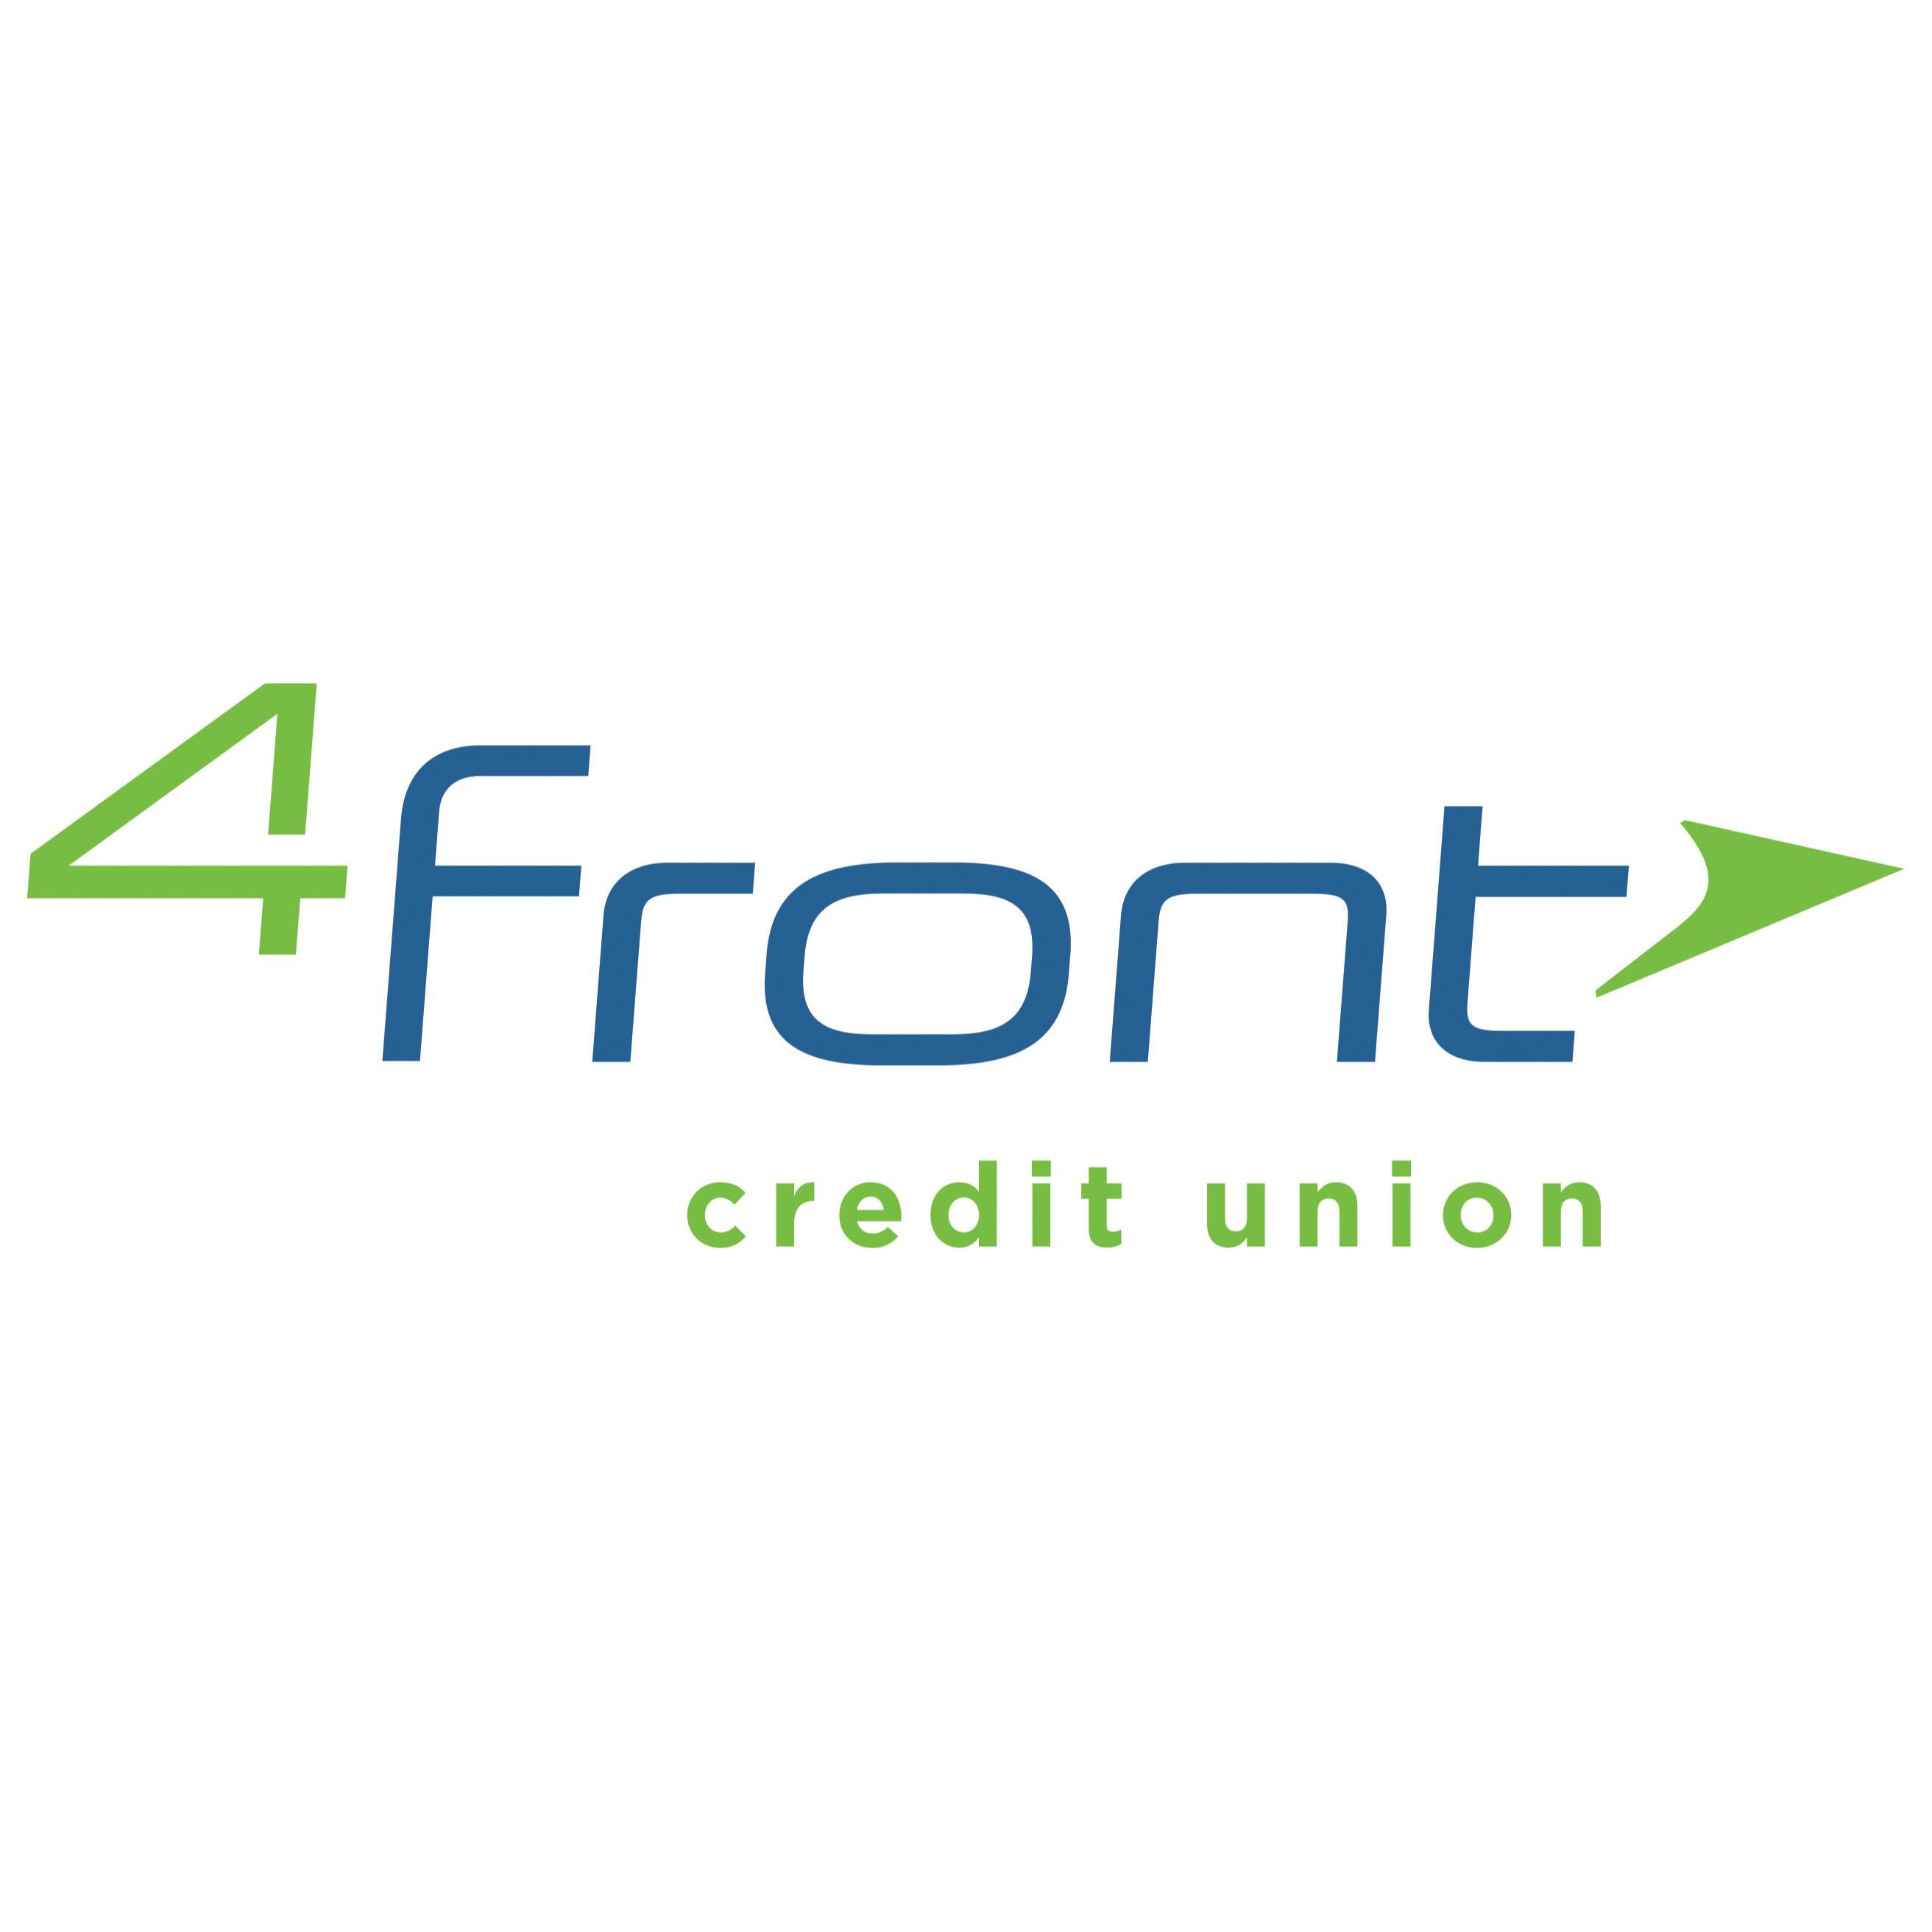 4Front Credit Union 4Front Credit Union Manistee (800)765-0110